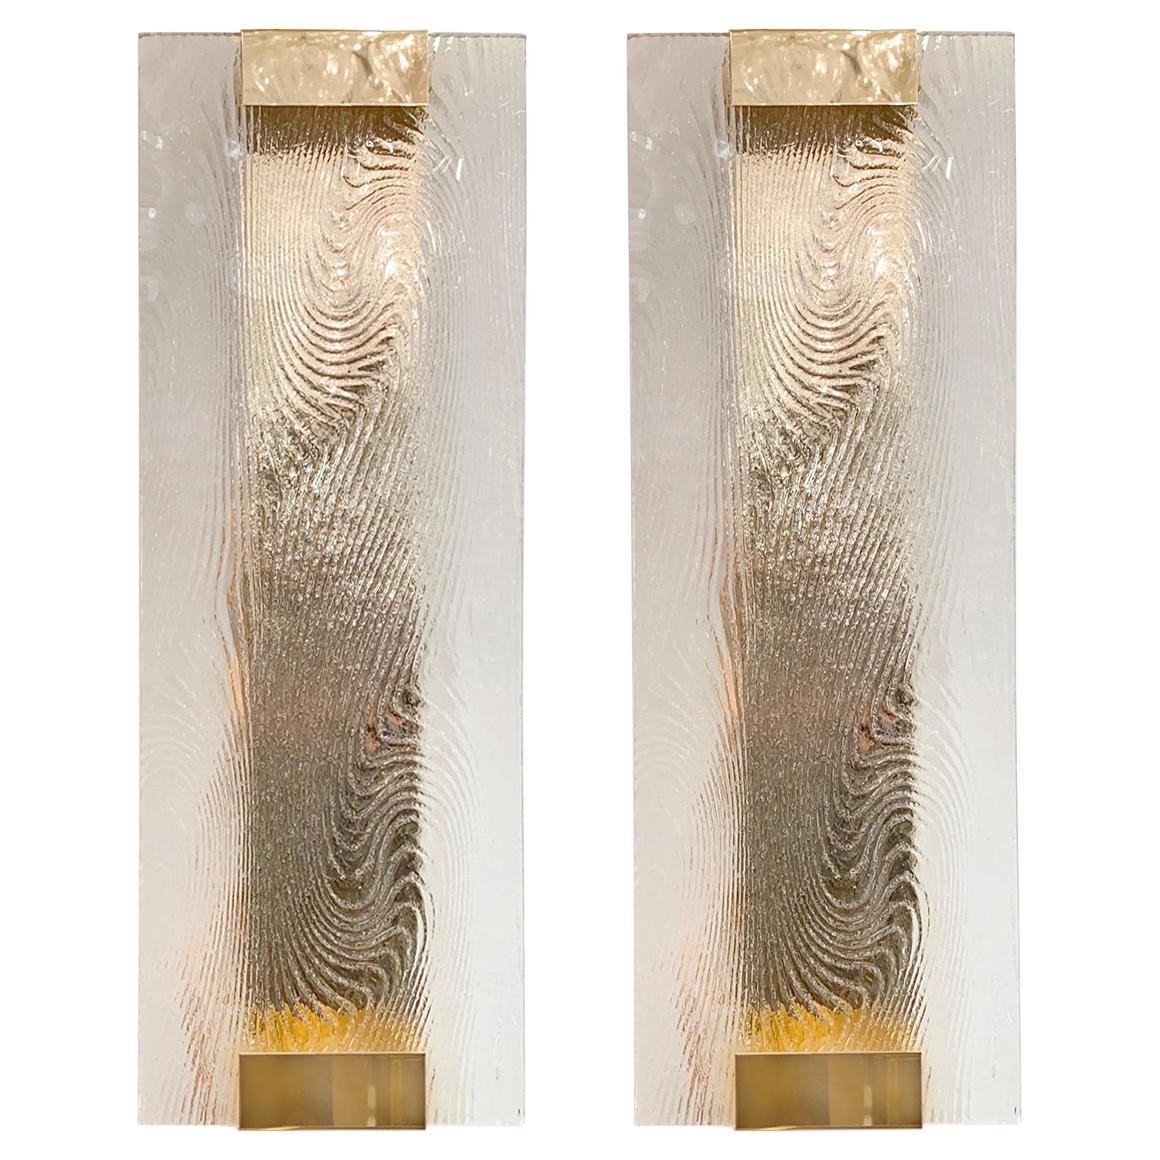 Pair of Brass Sconces with Frosted Glass Panel Shades